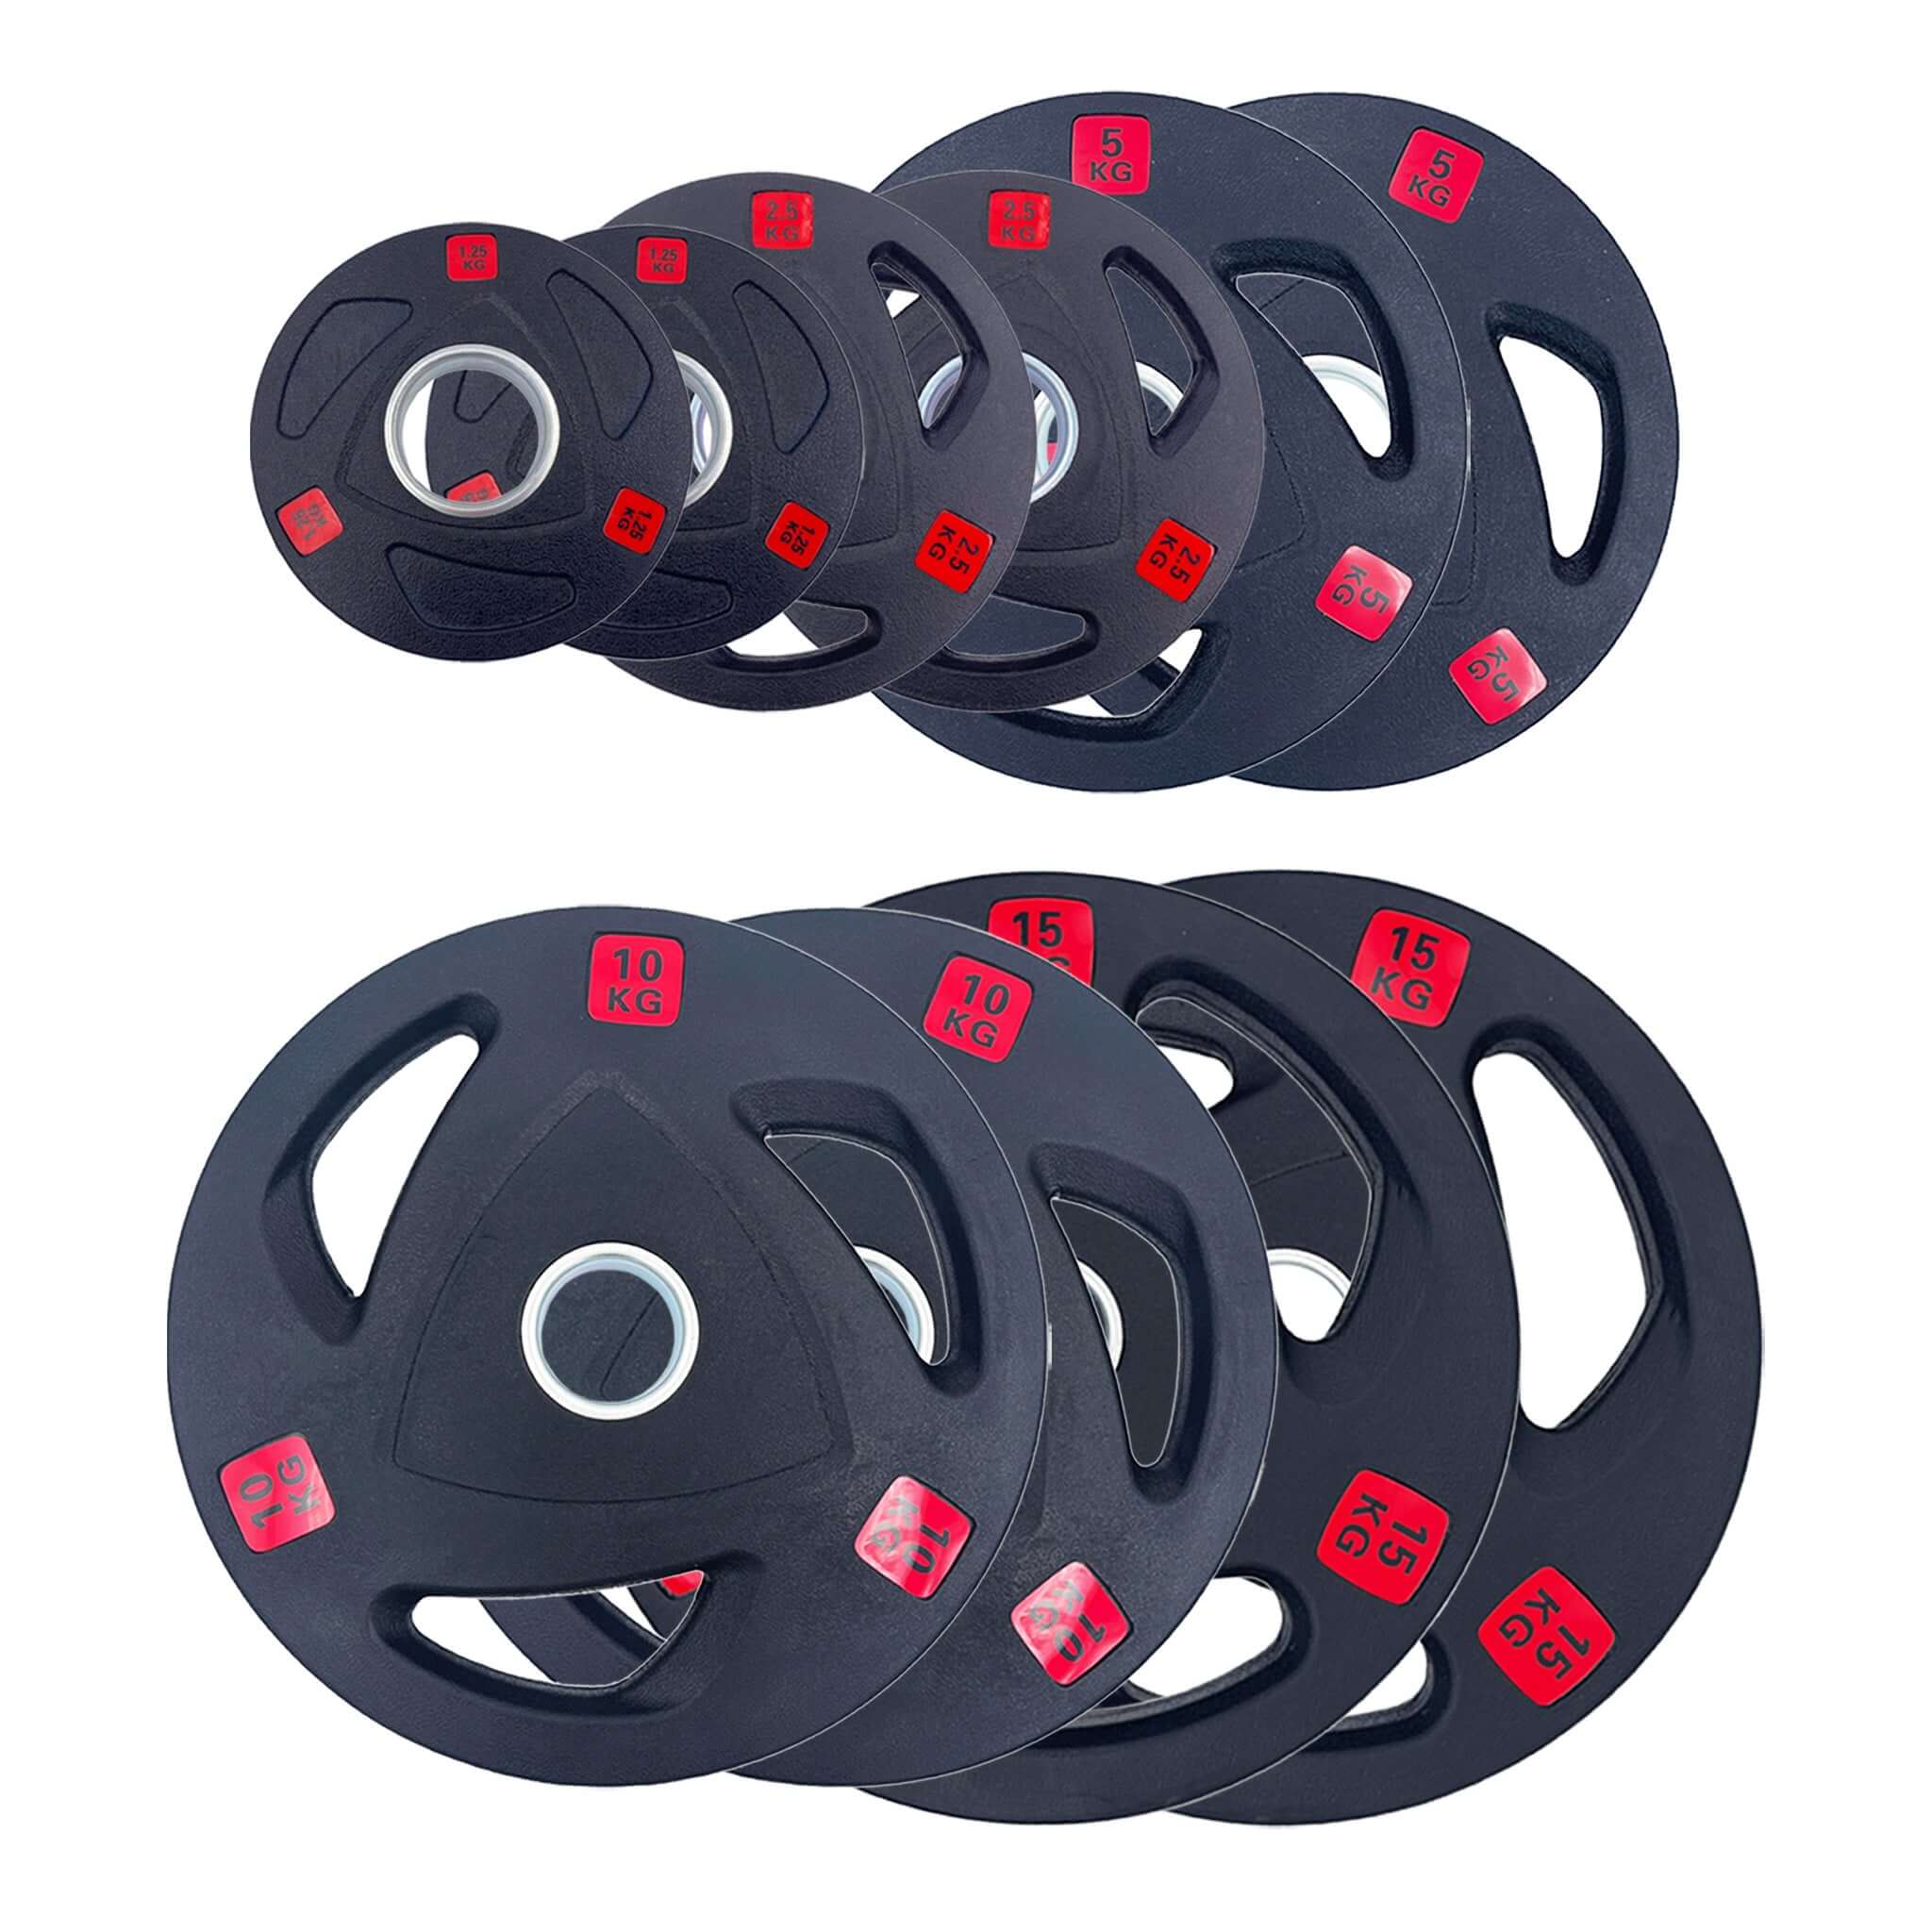 67.5kg Rubber Tri-Grip Weight Plates Package Type-A | INSOURCE